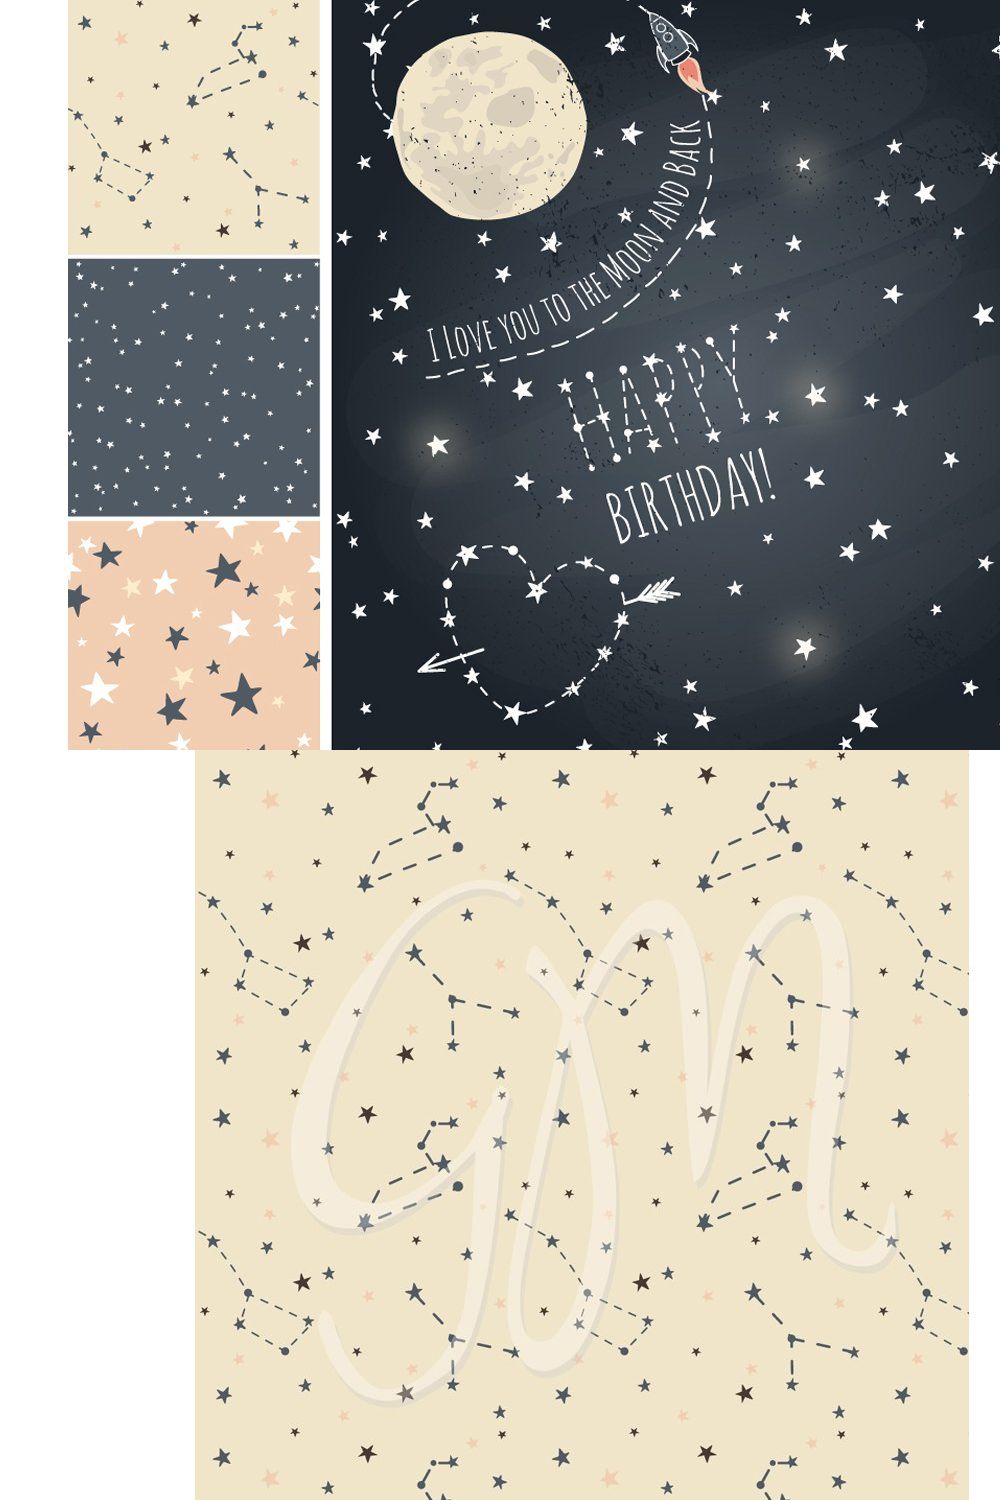 Moon, Stars, Galaxy, starry night pinterest preview image.